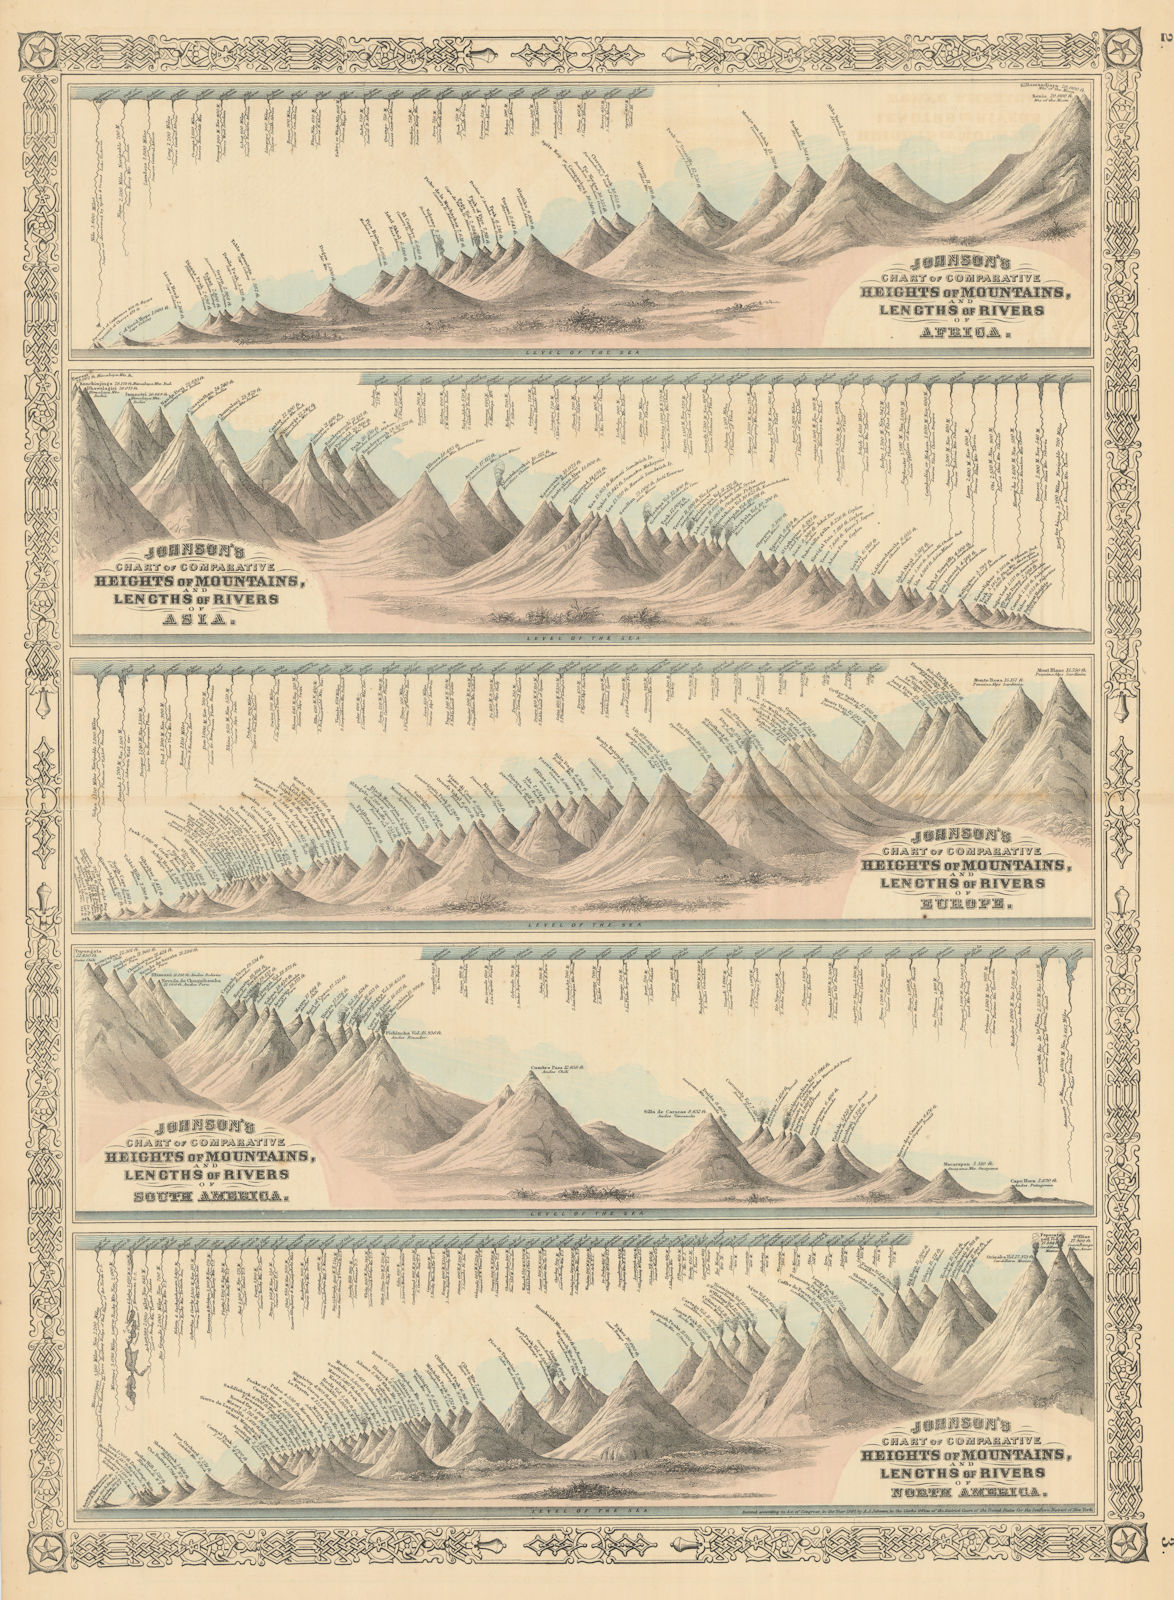 Associate Product Johnson's Mountains Rivers. Africa, Asia, Europe, South & North America 1866 map